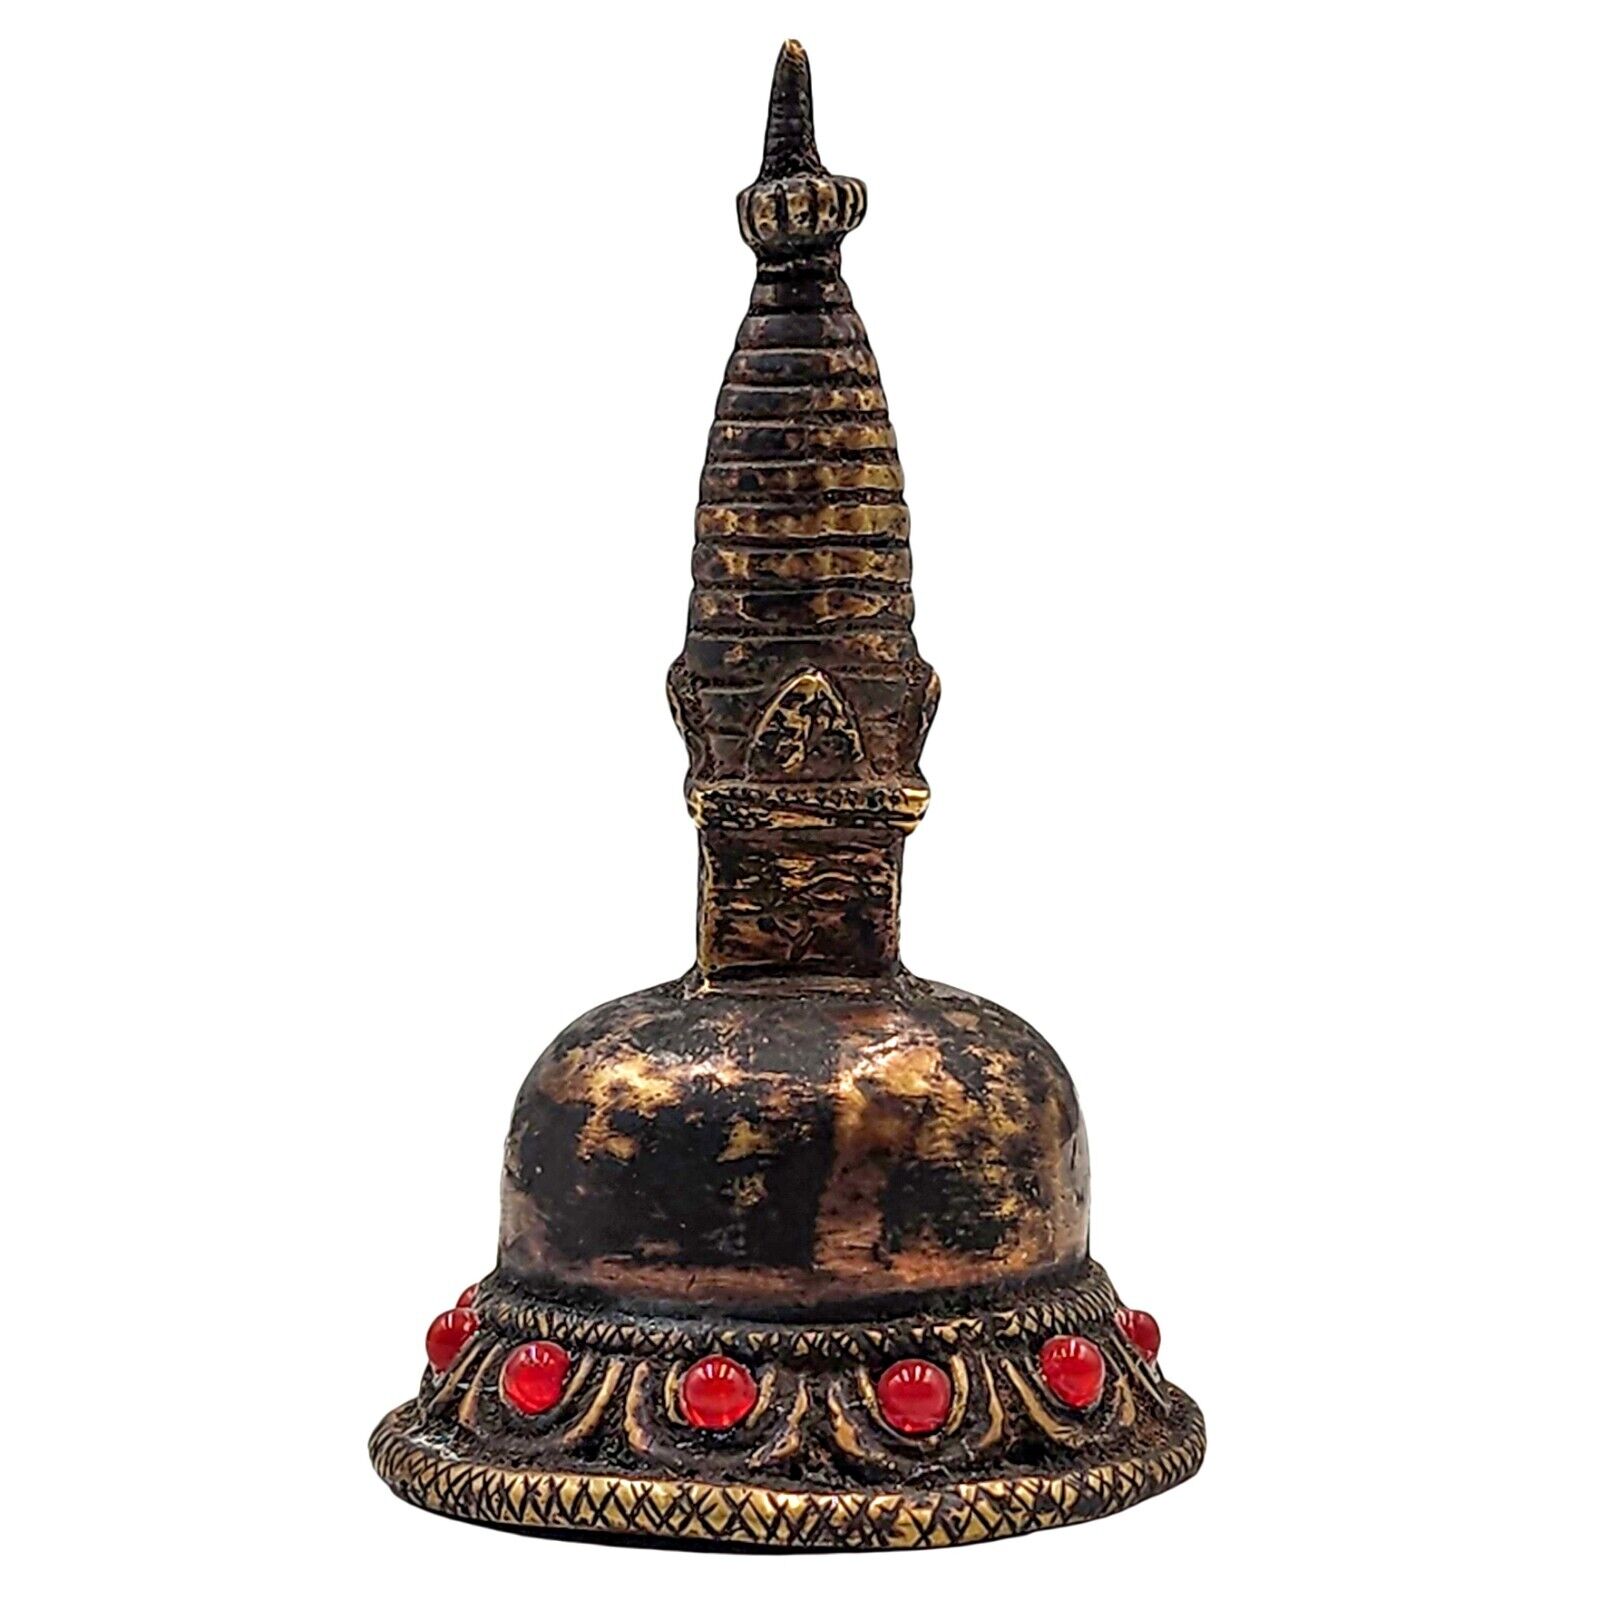 Tibetan Antiqued Home Décor Buddhist Cooper Lotus Stupa Statue Nepal Collectible